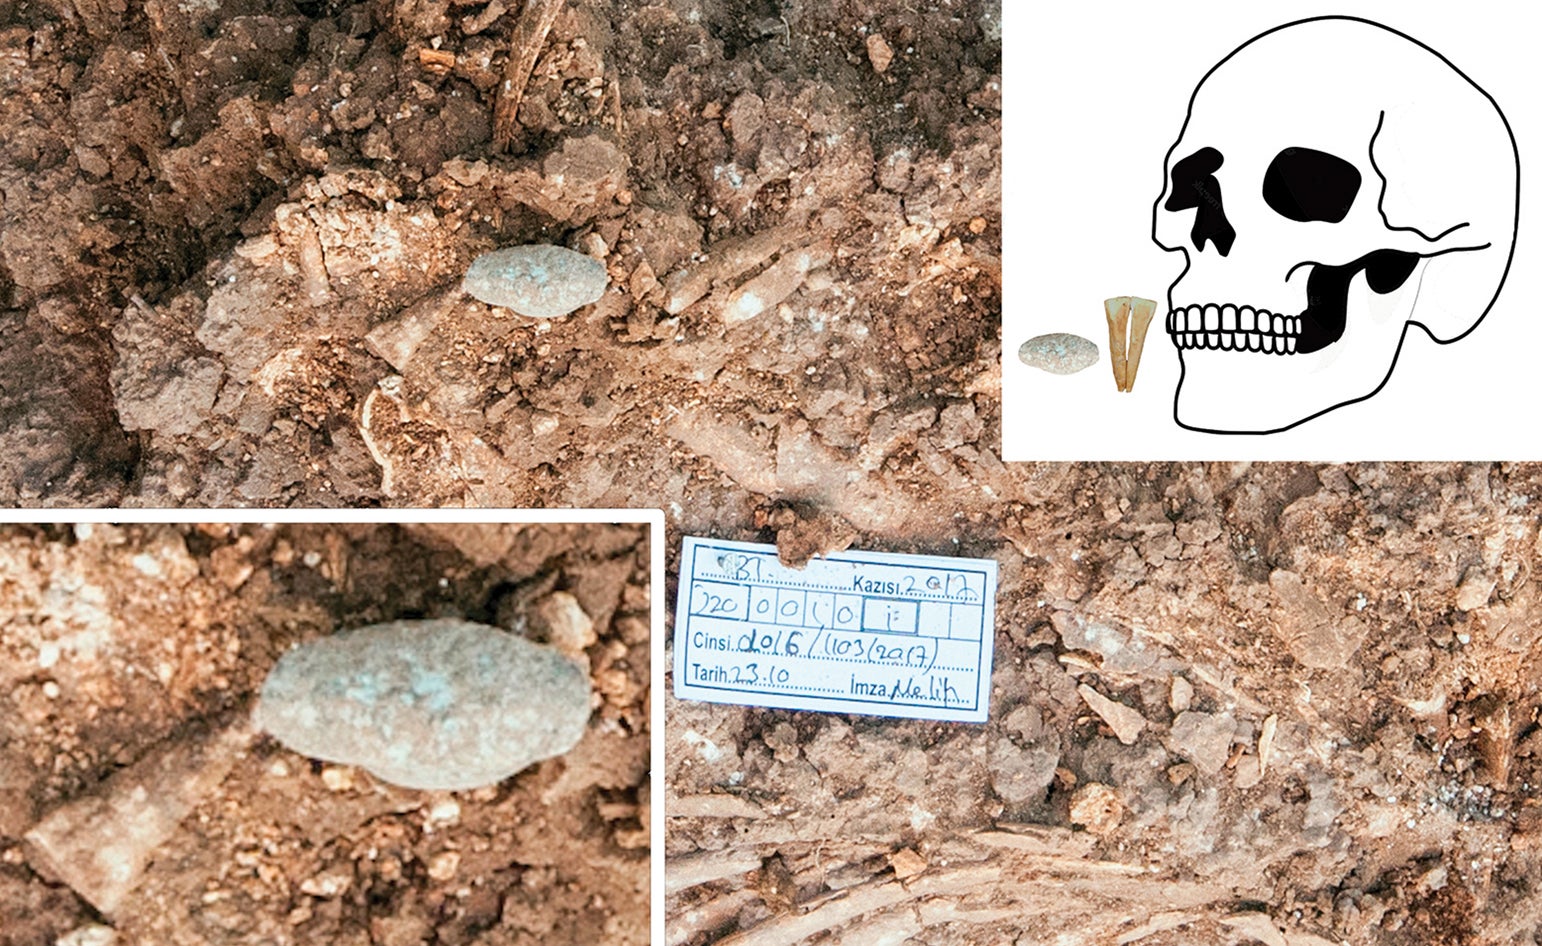 A type-5 labret (lip piercing) example from inside the mouth (inset illustration). (photographs from the Boncuklu Tarla Excavation Archive, figure by authors).